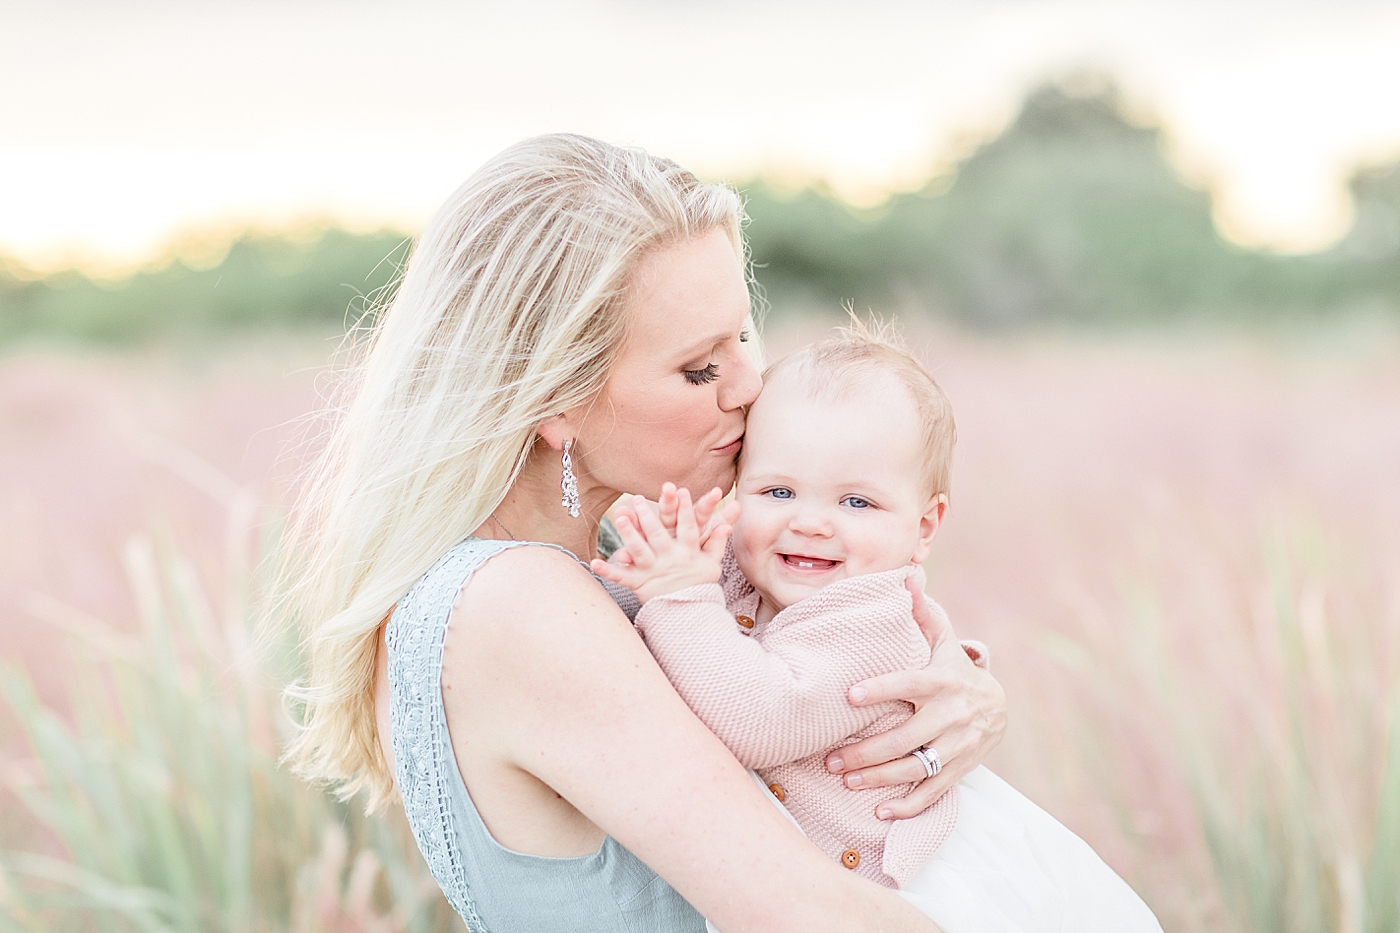 Mom kissing her one year old daughter and she's clapping. Photo by Brittany Elise Photography.